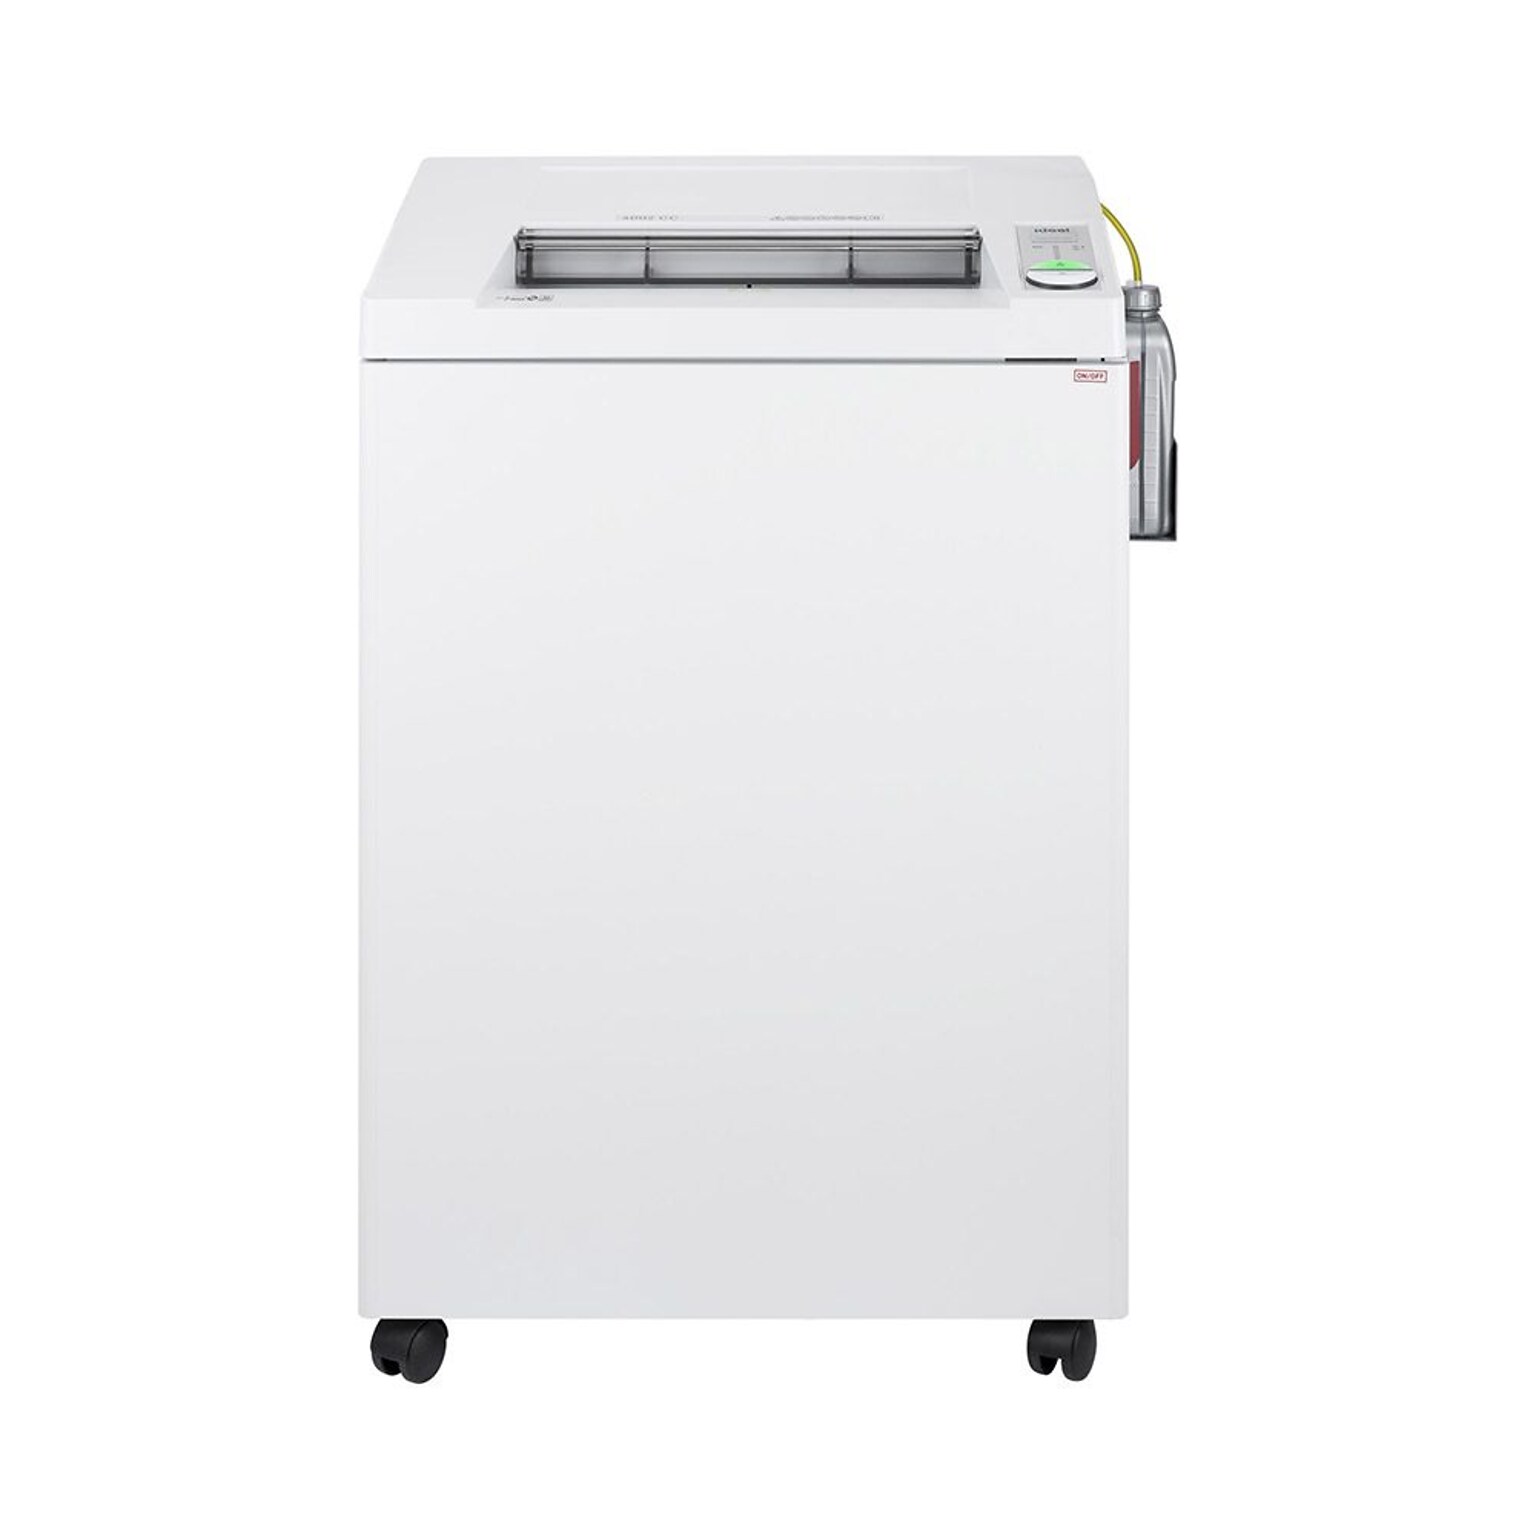 IDEAL 4002 Centralized Office Shredder 26-Sheet Capacity Cross-Cut with Oiler (IDEDSH0393OH)